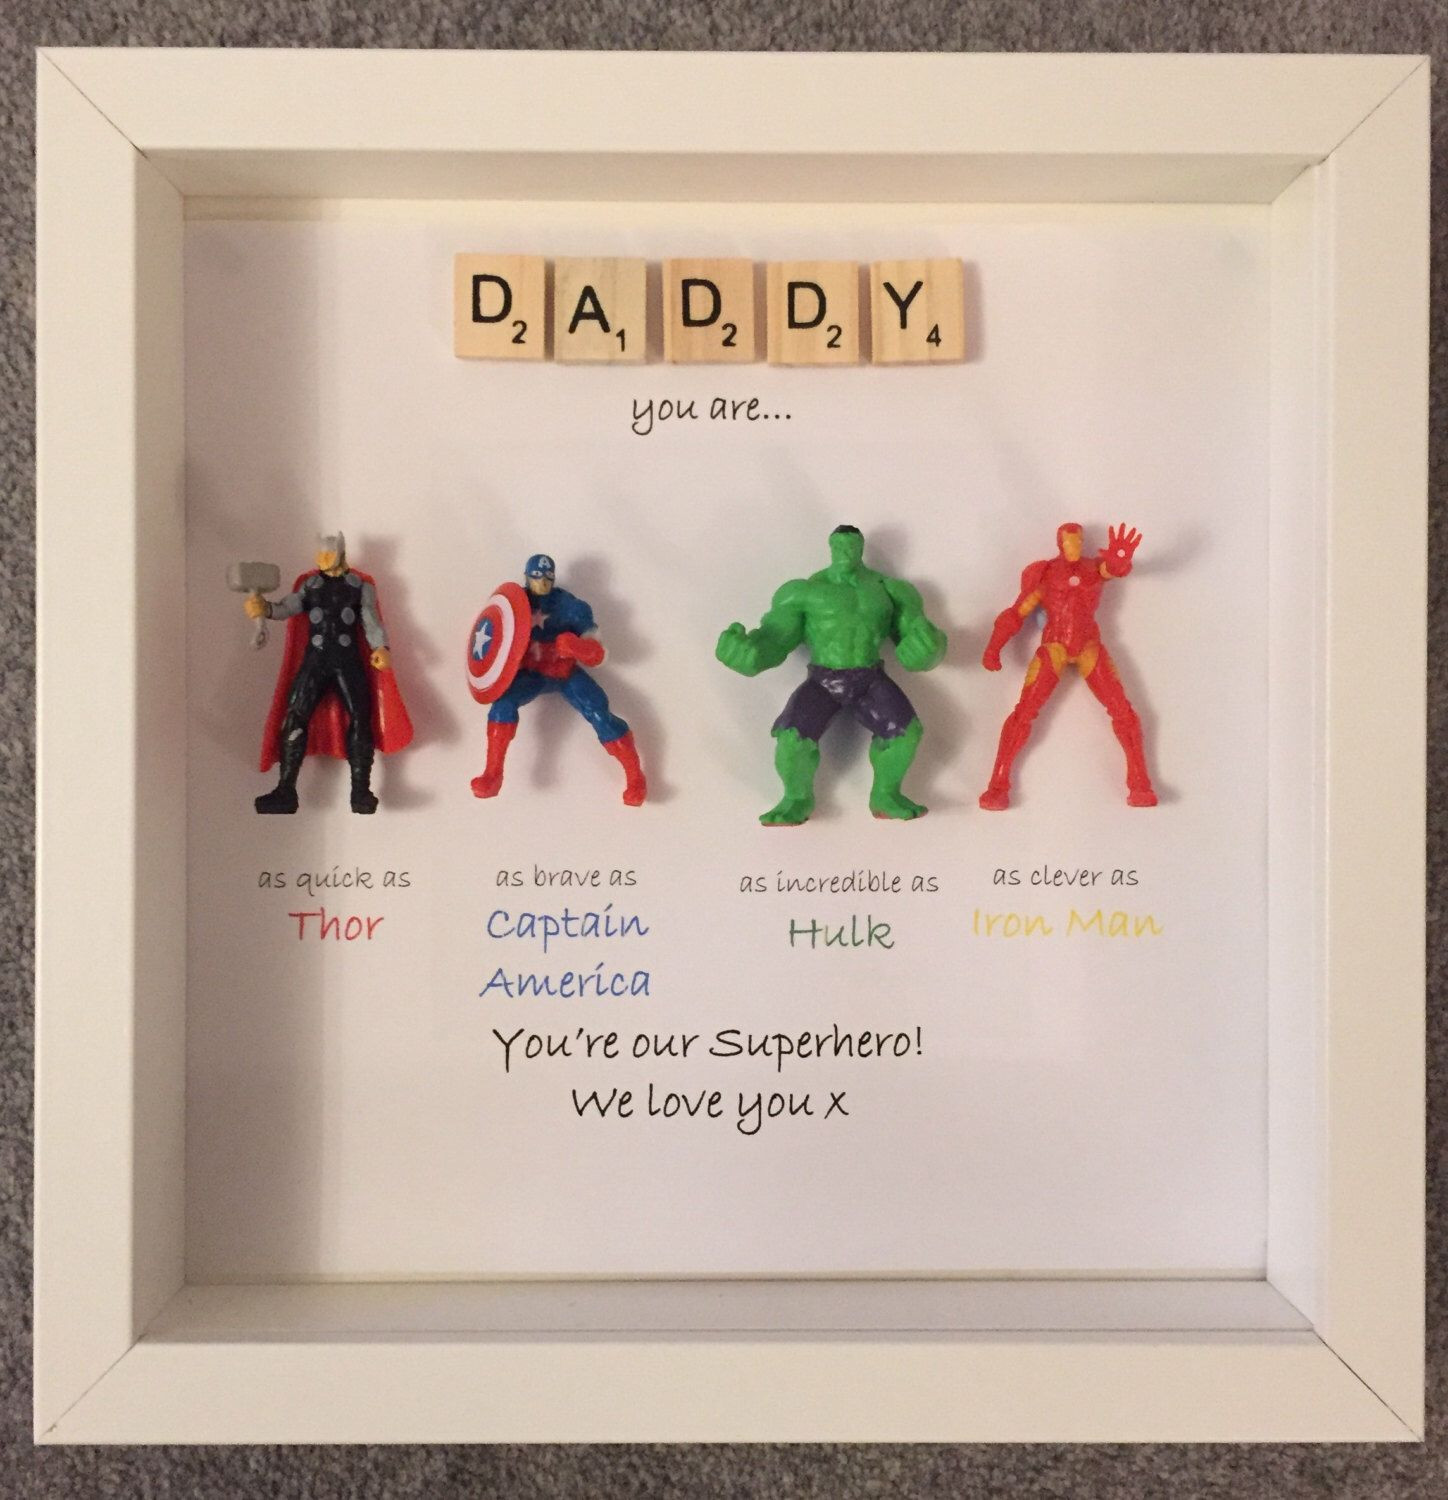 Gift Ideas For Daughters Boyfriend
 Avengers Superhero figures frame t Ideal for dad